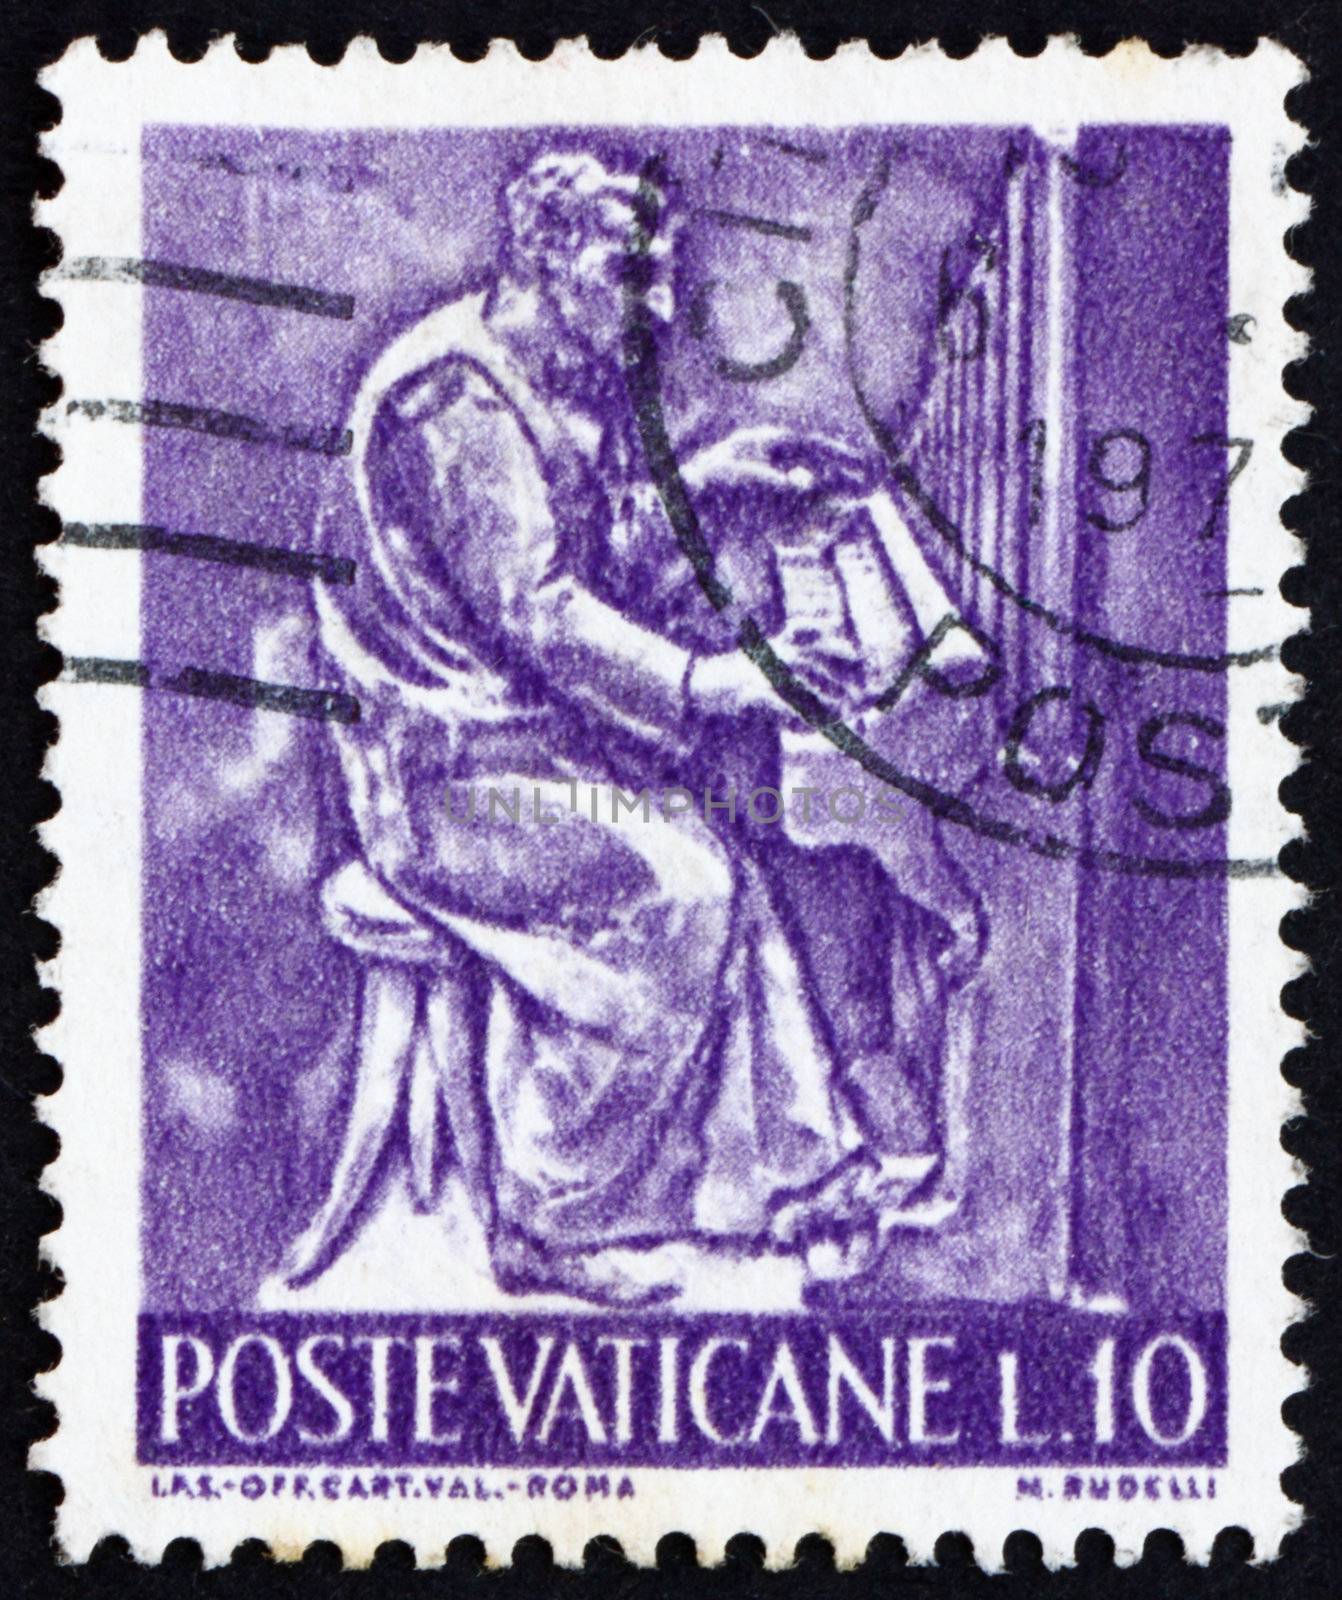 VATICAN - CIRCA 1966: a stamp printed in the Vatican shows Pope Paul VI, Organist, Bas-relief by Mario Rudelli from the Chair in the Pope's Private Chapel, circa 1966